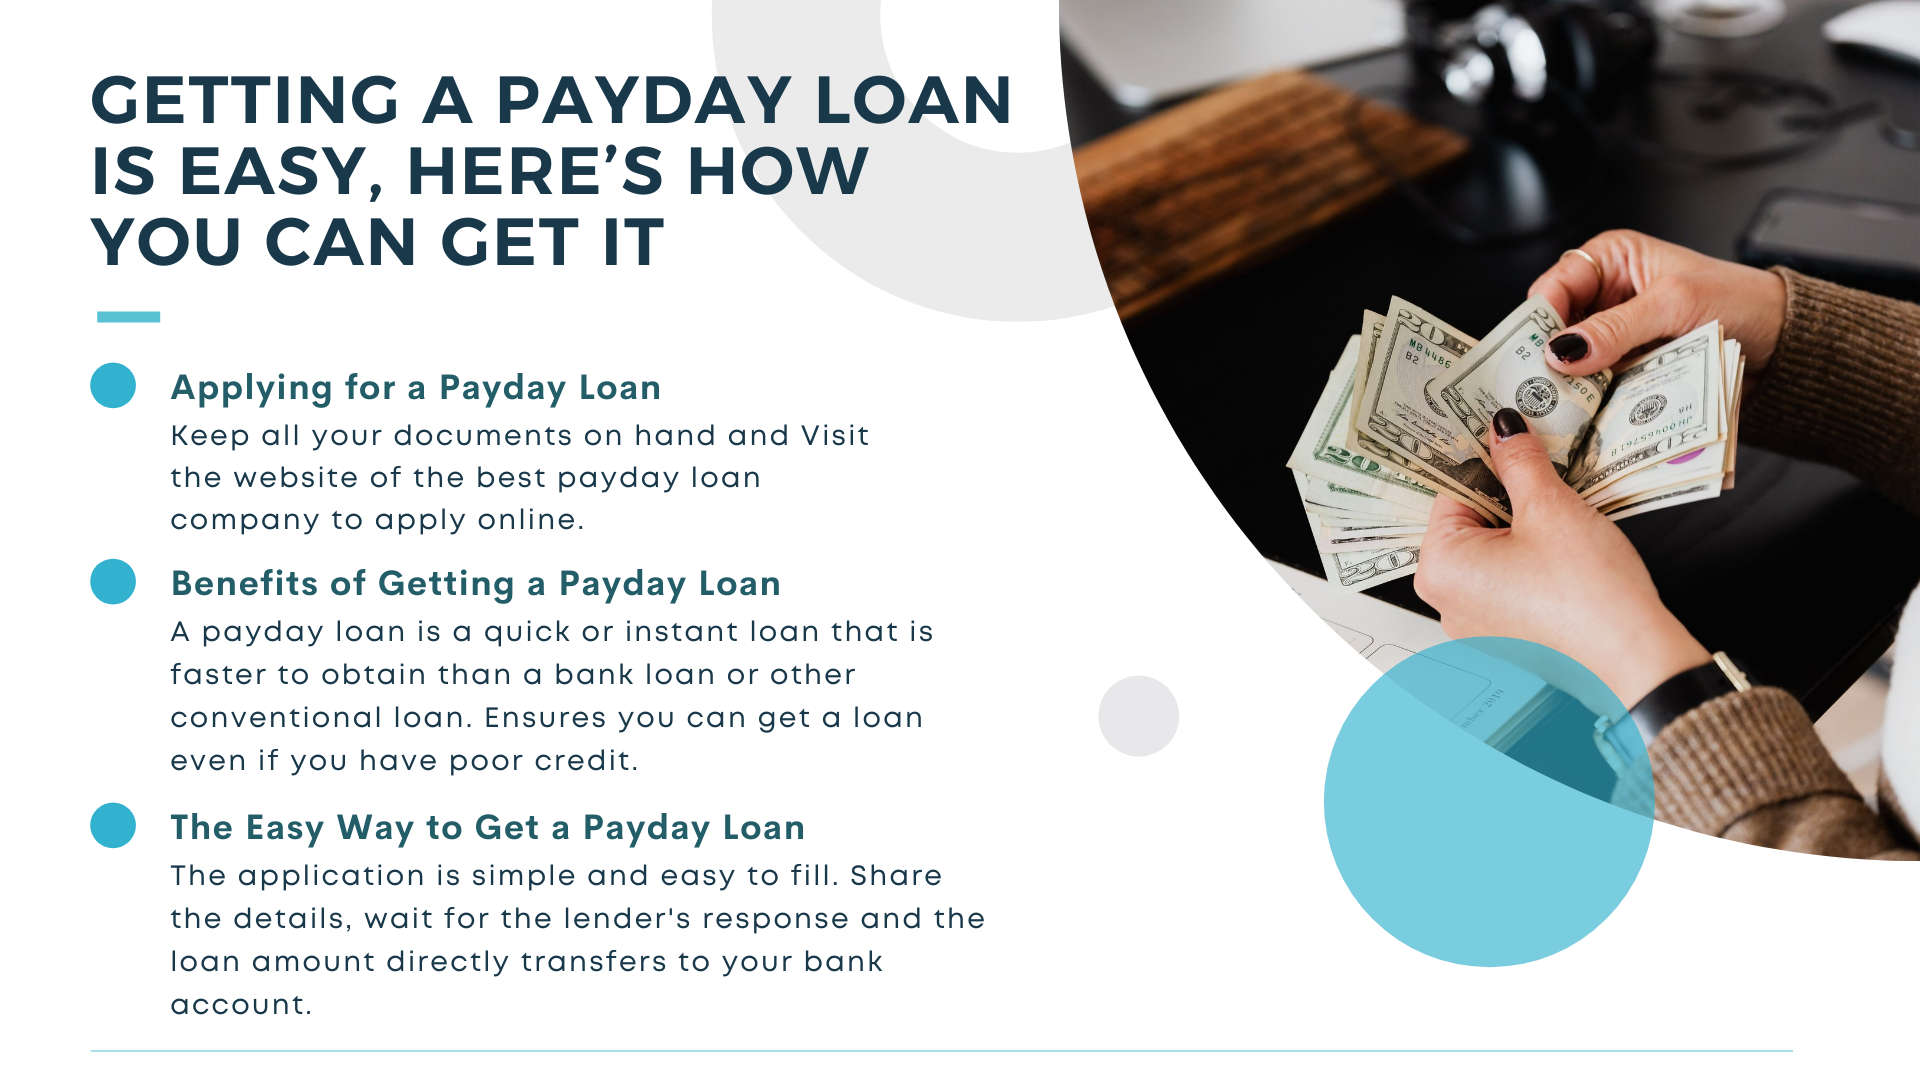 Getting a Payday Loan is easy, here’s how you can get it